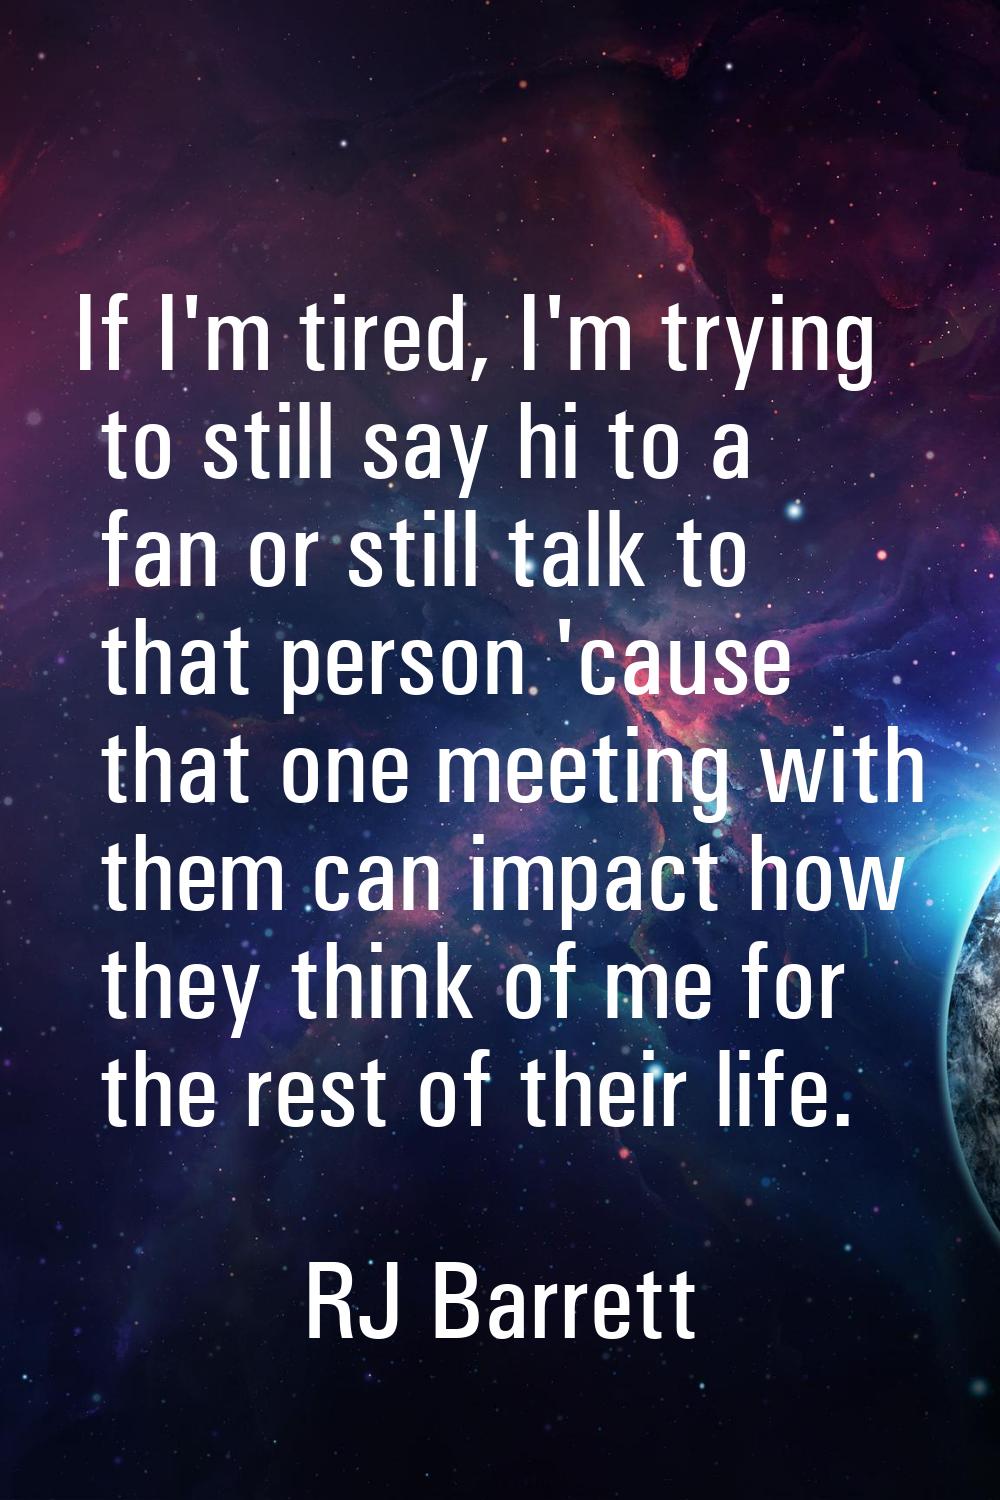 If I'm tired, I'm trying to still say hi to a fan or still talk to that person 'cause that one meet